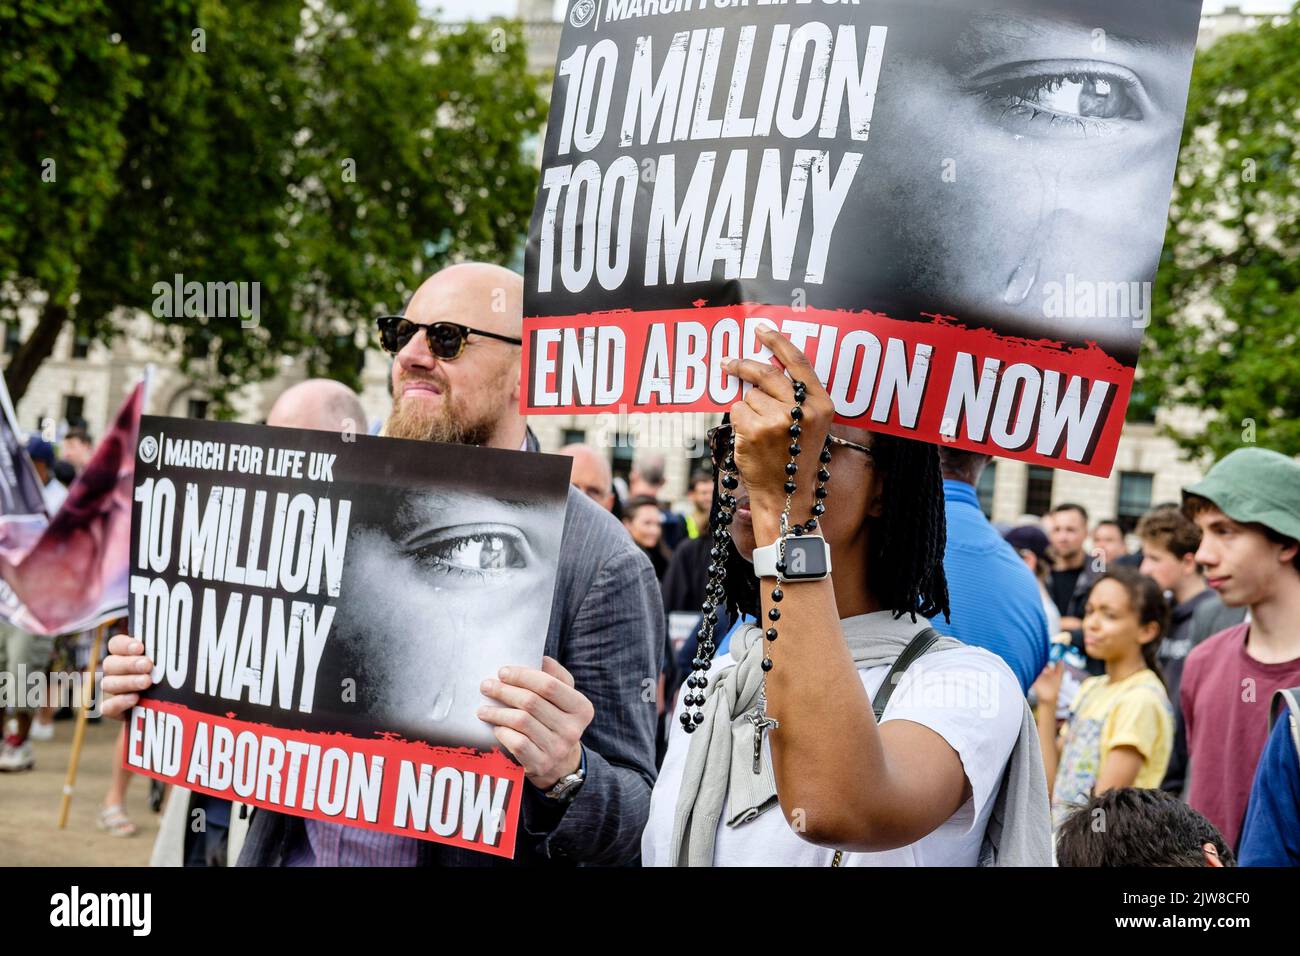 London, UK. 3 September 2022. Members of anti-abortion groups rally in Parliament Square, Westminster following an annual 'March For Life' in central London. Pro-choice abortion campaigners also gather to voice their opposition to the anti-abortion movement. Pictured: Placards displaying anti abortion messaging are held by activists during the rally. Stock Photo